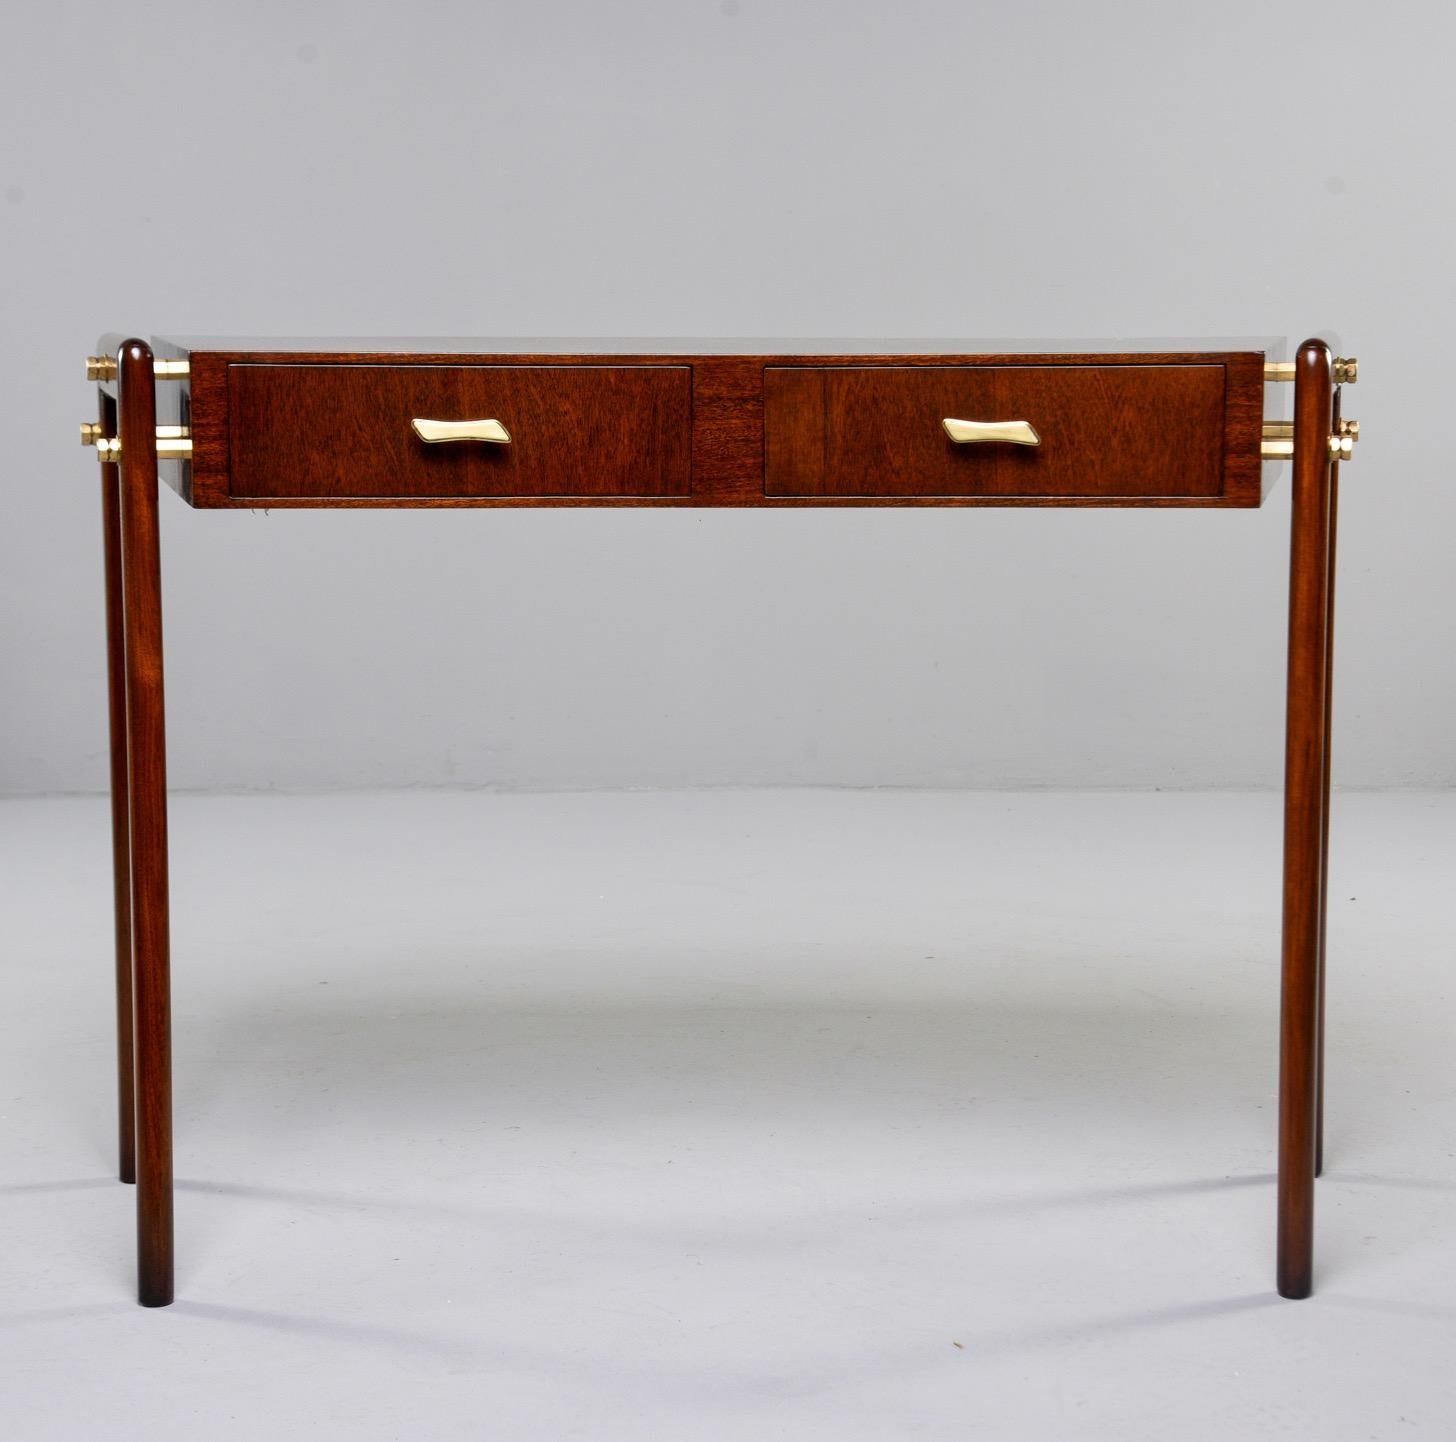 Italian writing desk with great midcentury style, circa 1960s. Beech desk with mahogany veneer and brass hardware features a subtly curved front with two functional drawers and sleek legs attached at the sides. Unknown maker. Found in Italy.
 